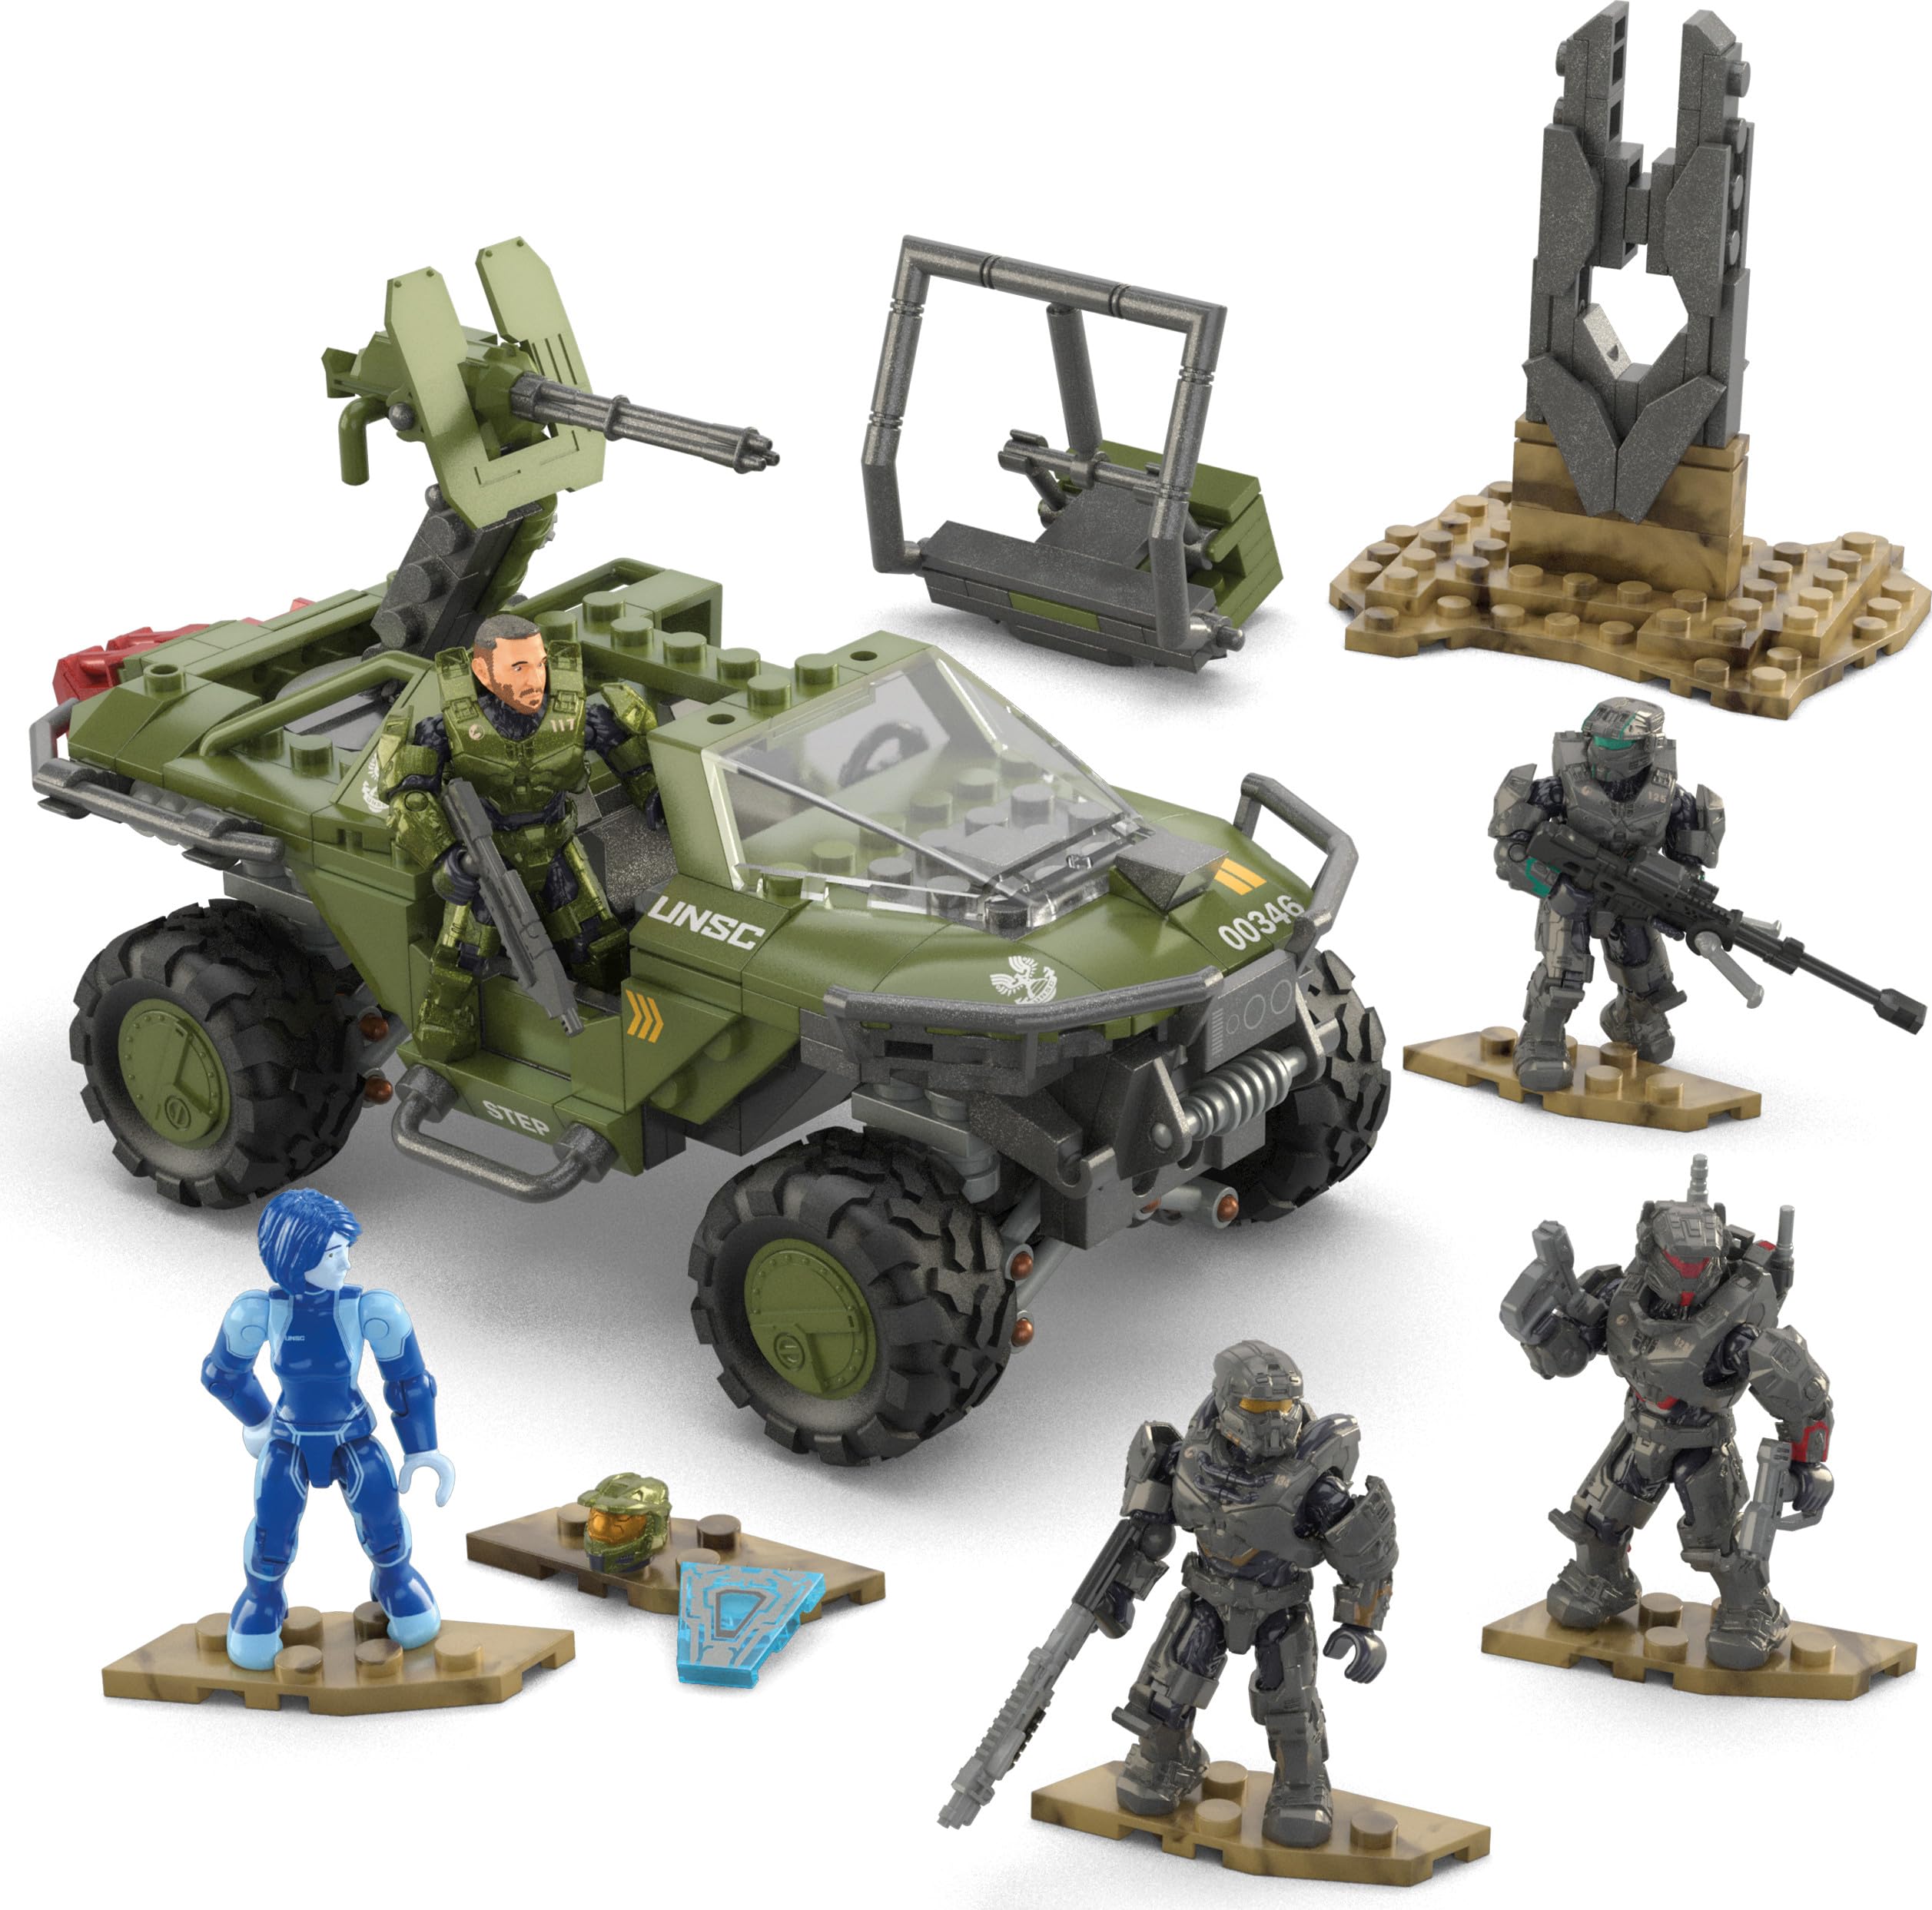 MEGA Halo Building Toys Set, FLEETCOM Warthog ATV Vehicle with 469 Pieces, 5 Poseable Micro Action Figures and Accessories